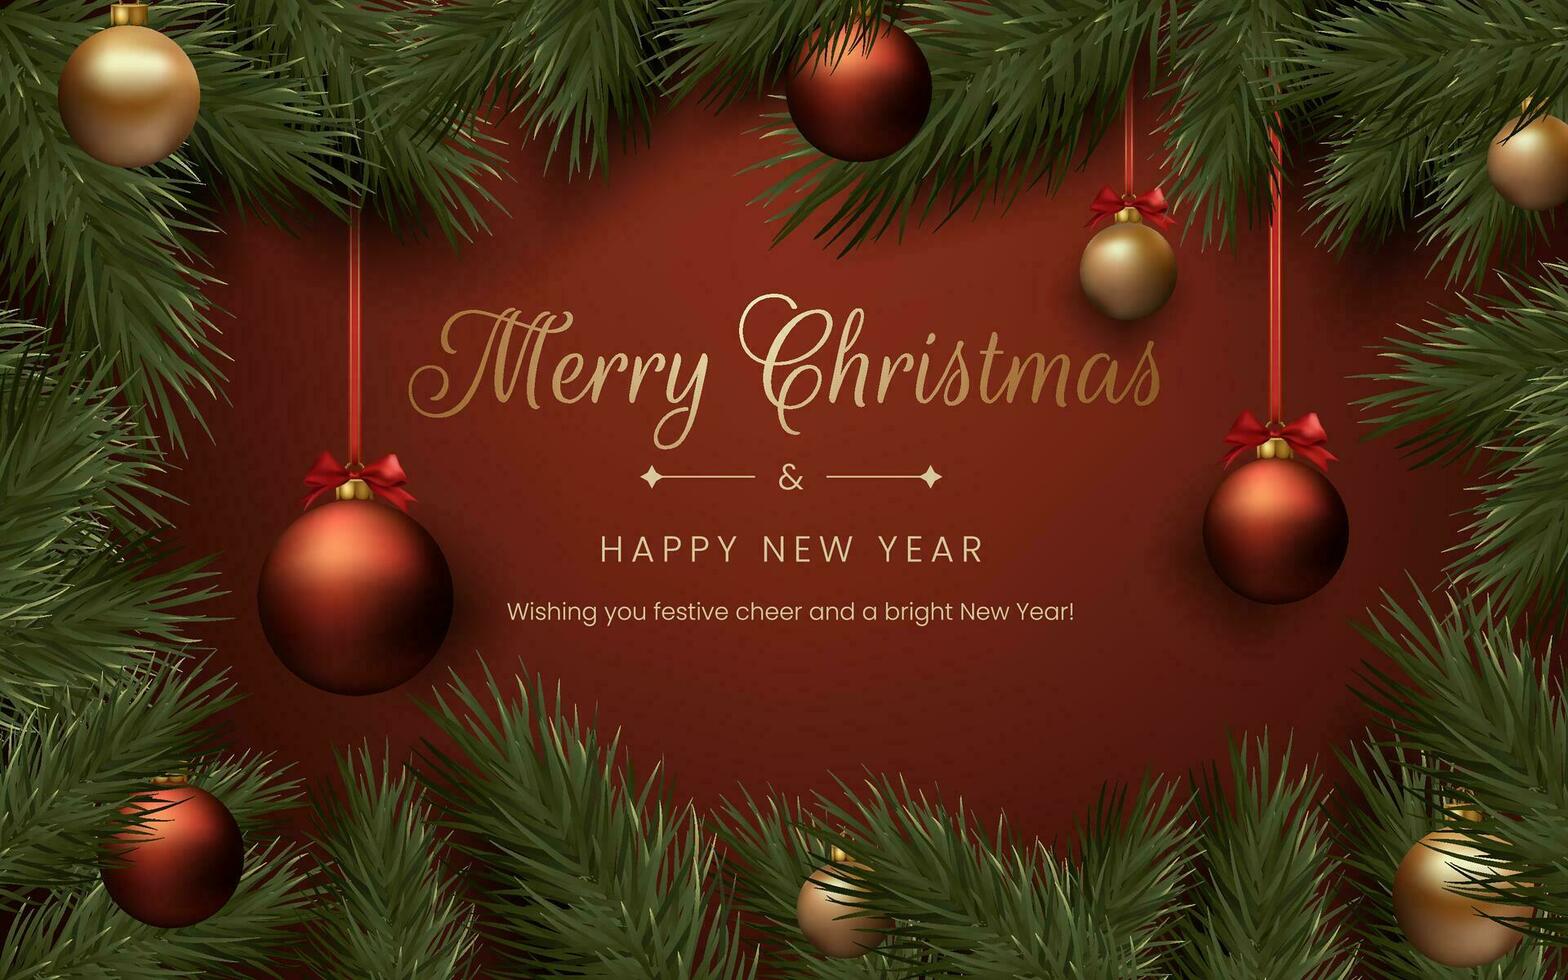 Merry Christmas realistic red and gold balls, pine tree branches, and festive decorations. This elegant design is suitable for holiday cards, invitations, and banners. Not AI generated vector